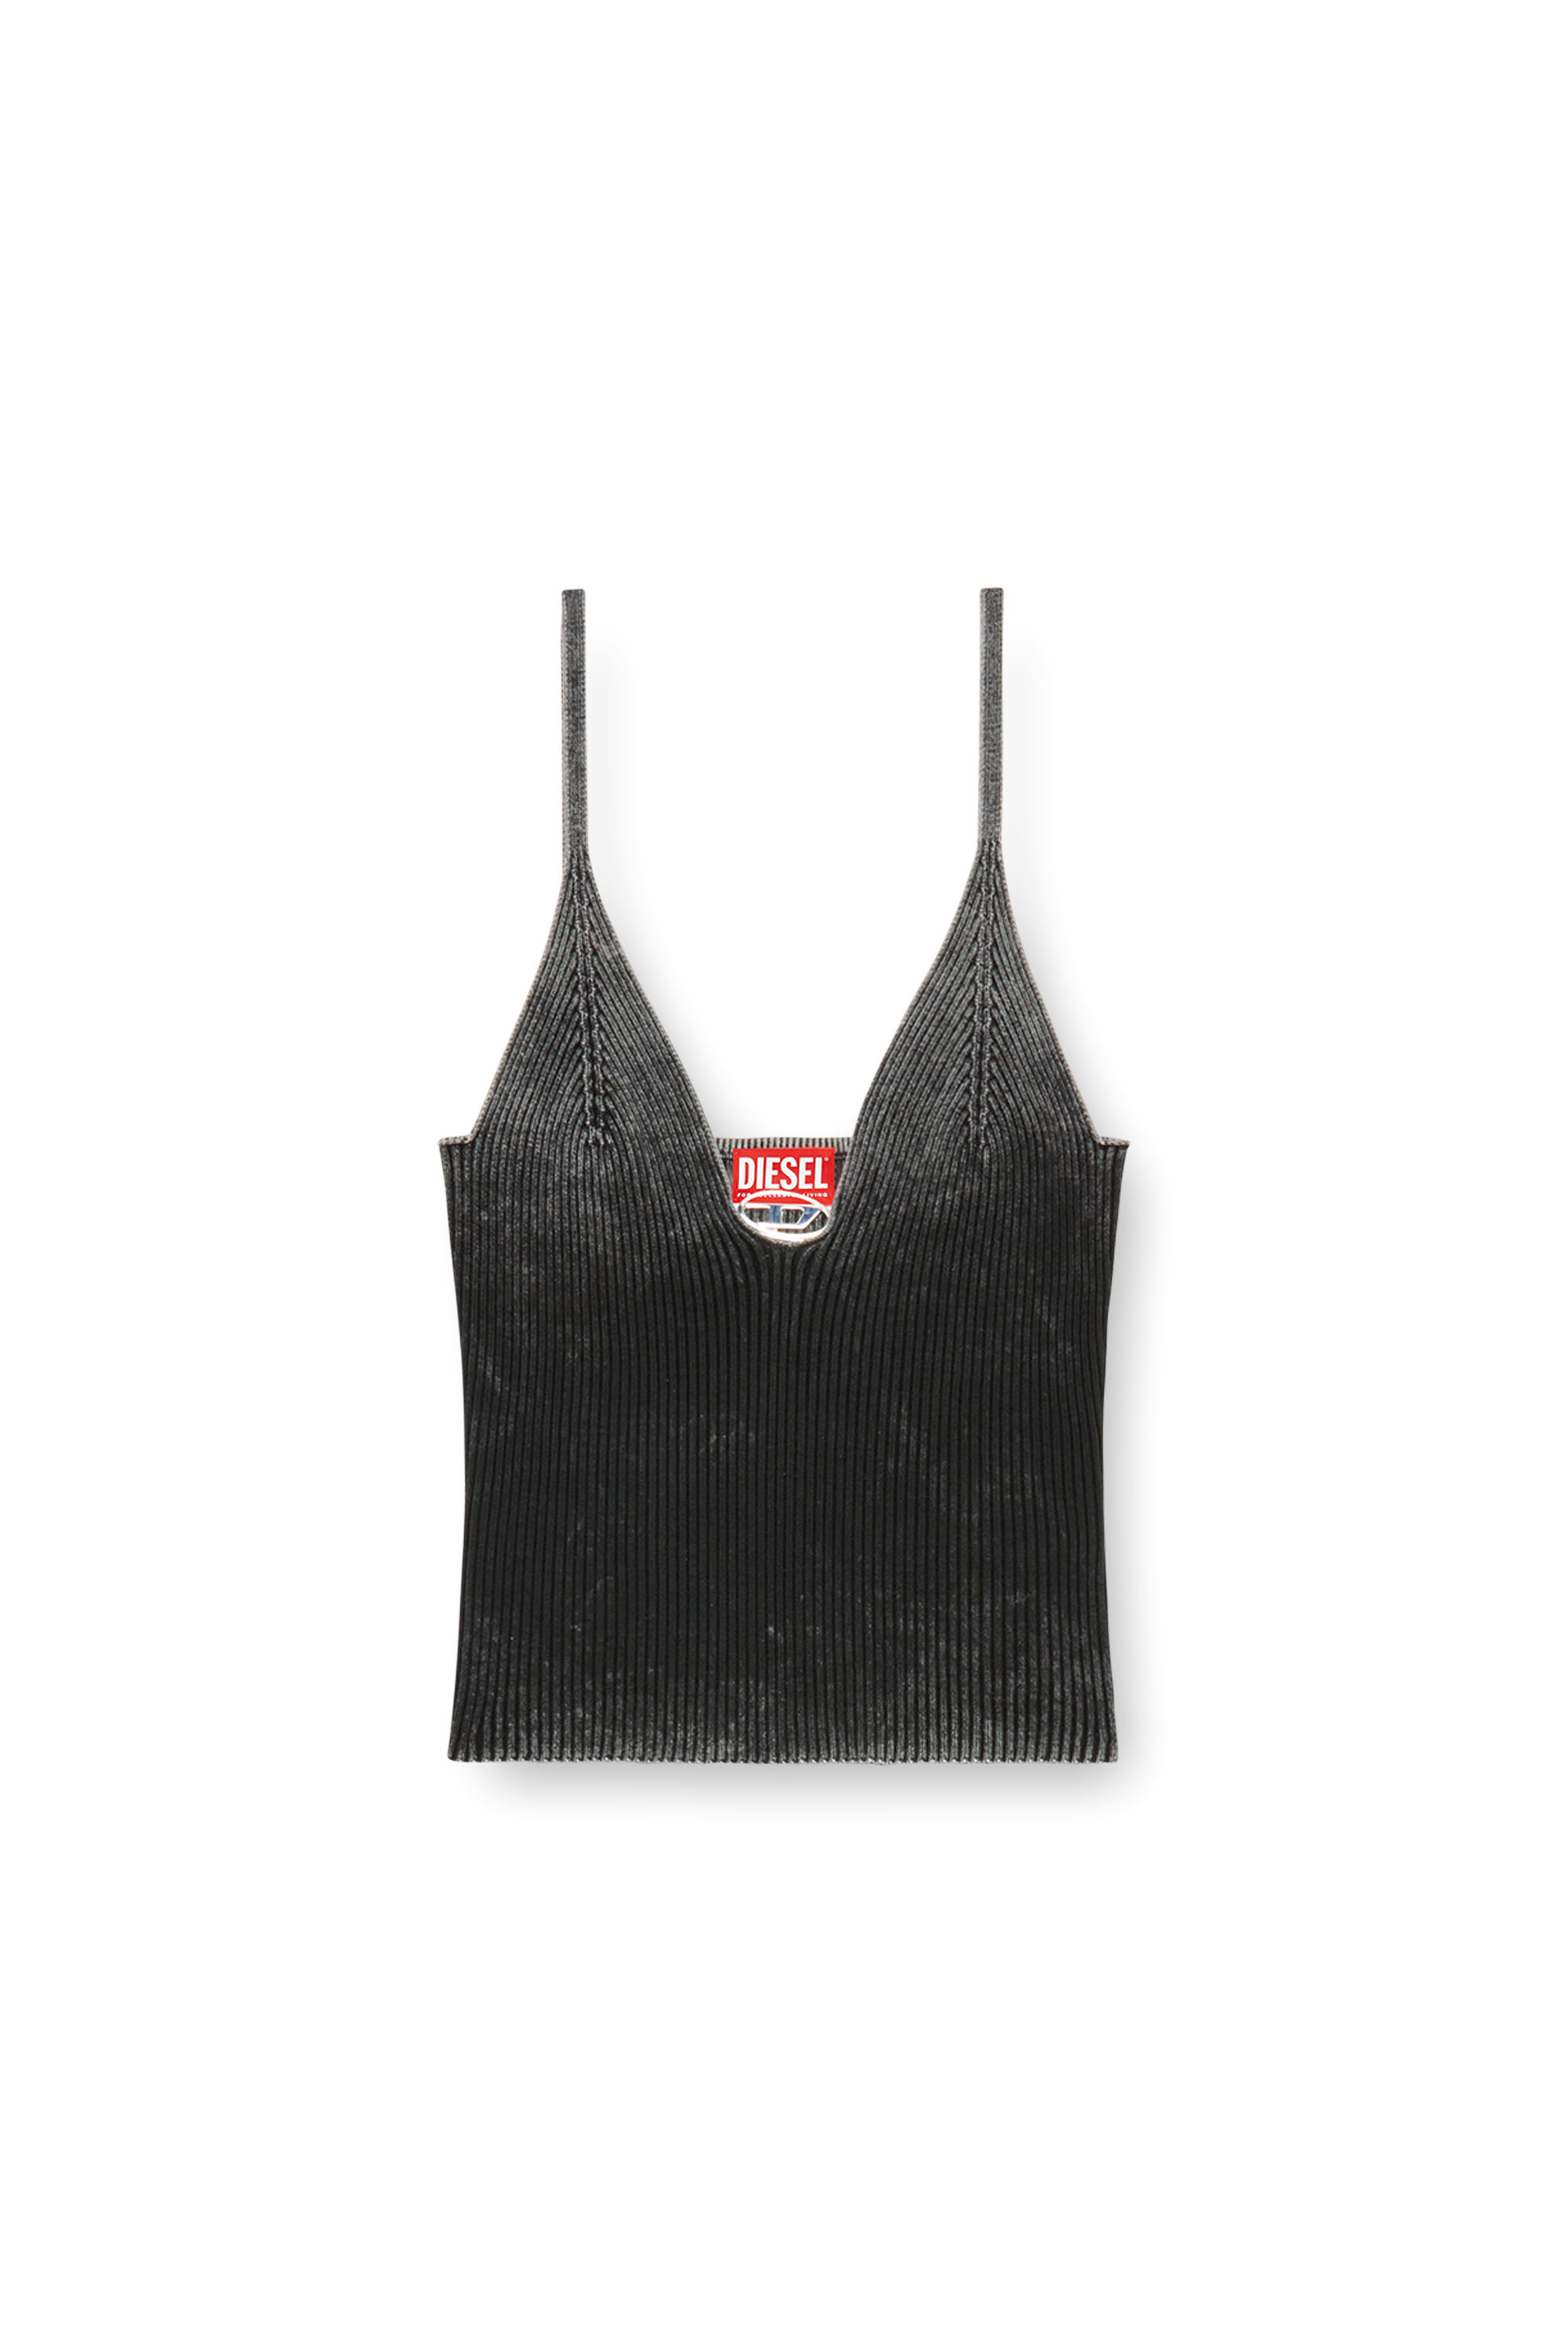 Diesel - M-LAILA, Woman Camisole in faded ribbed knit in Black - Image 3